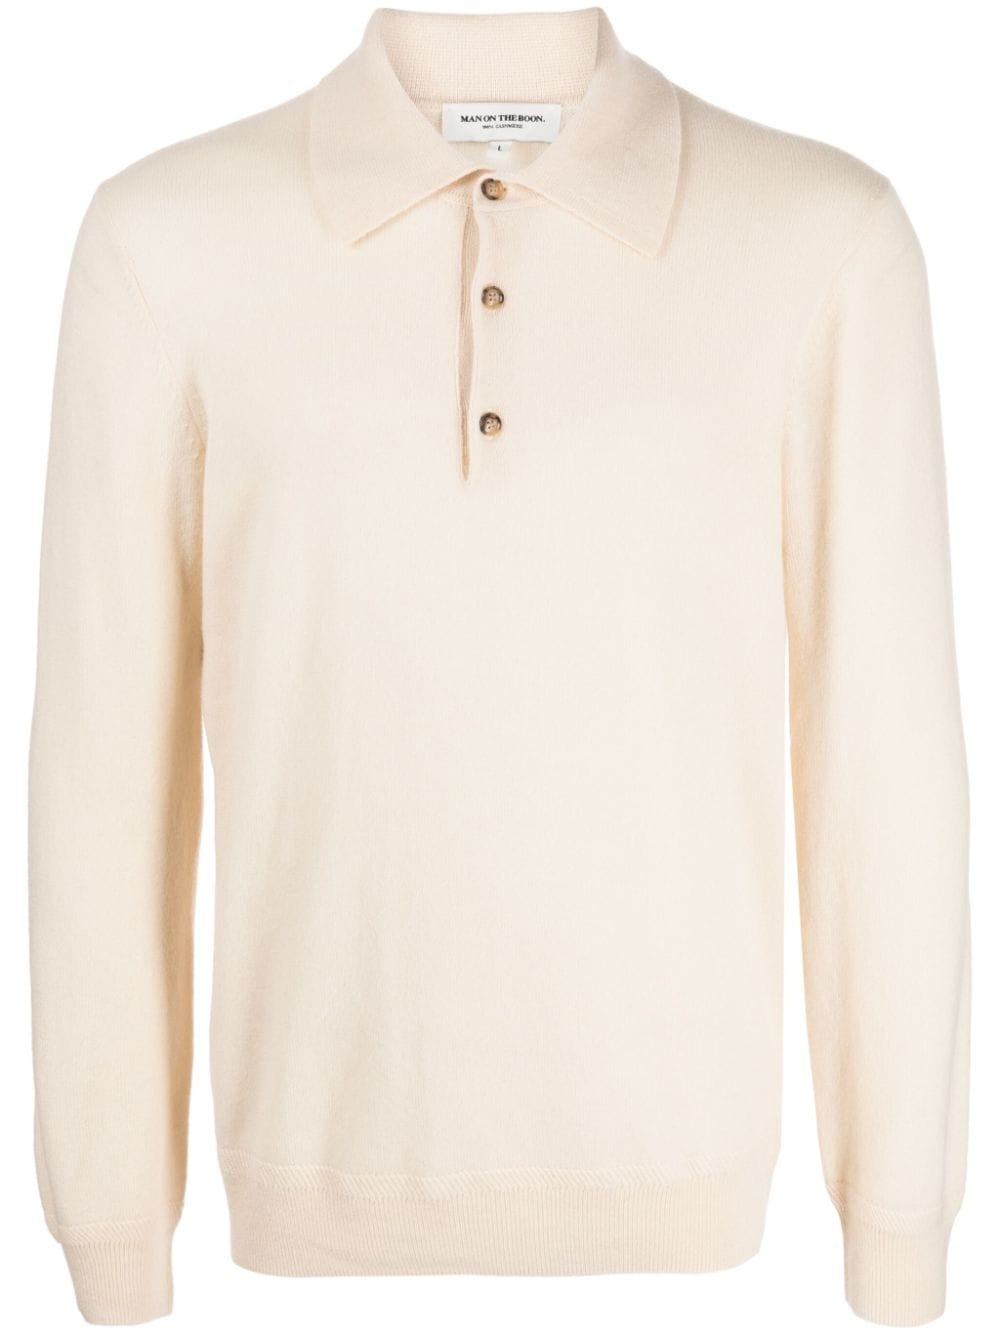 Man On The Boon. Polo-collar Cashmere Jumper In White